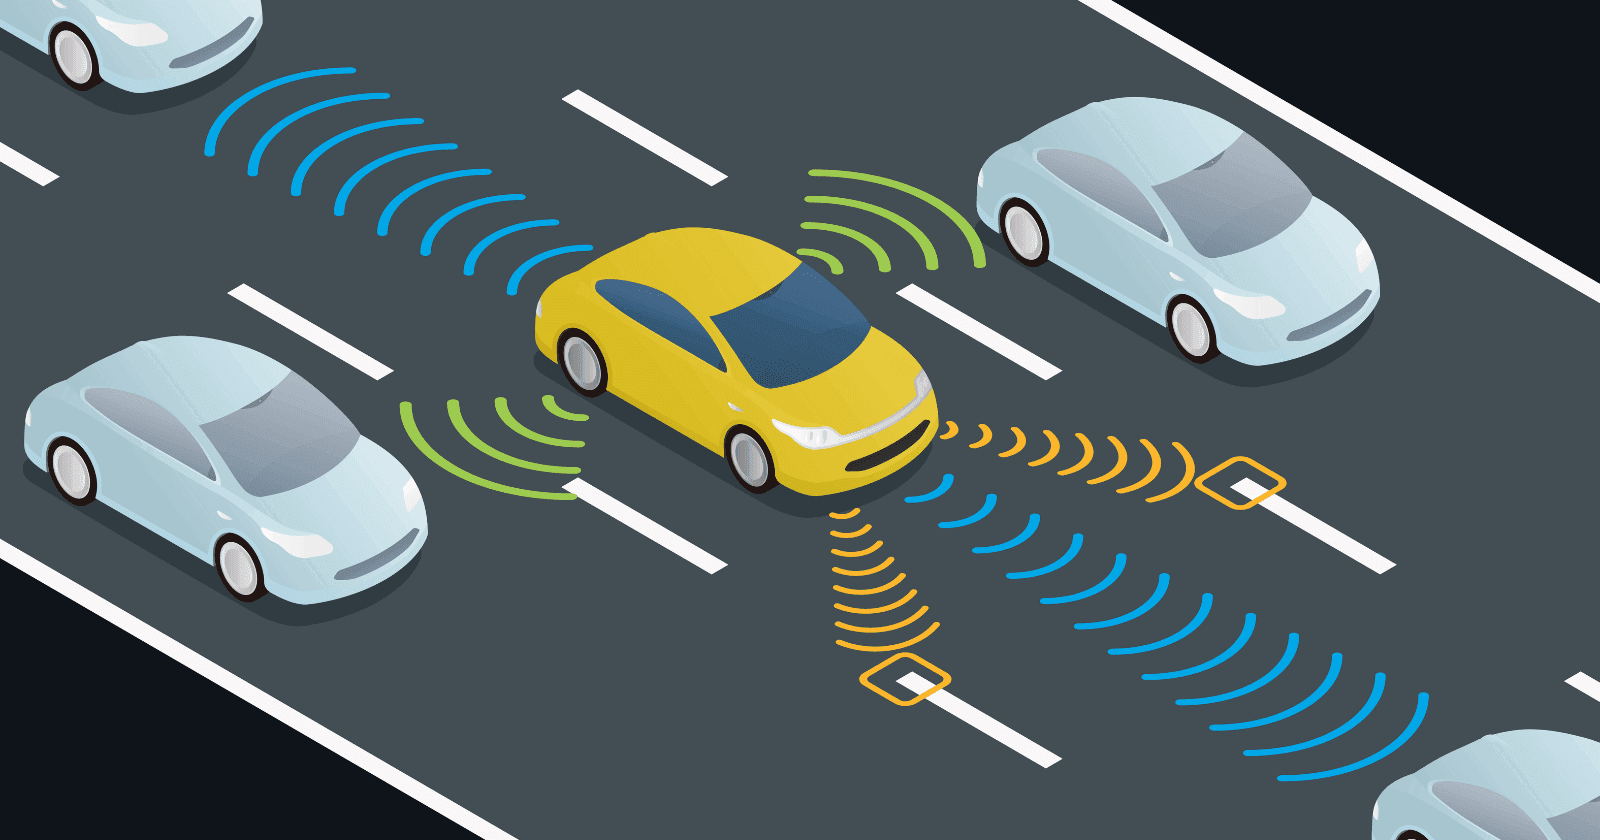 Adas Technology Will Work In Indian Traffic Conditionpng